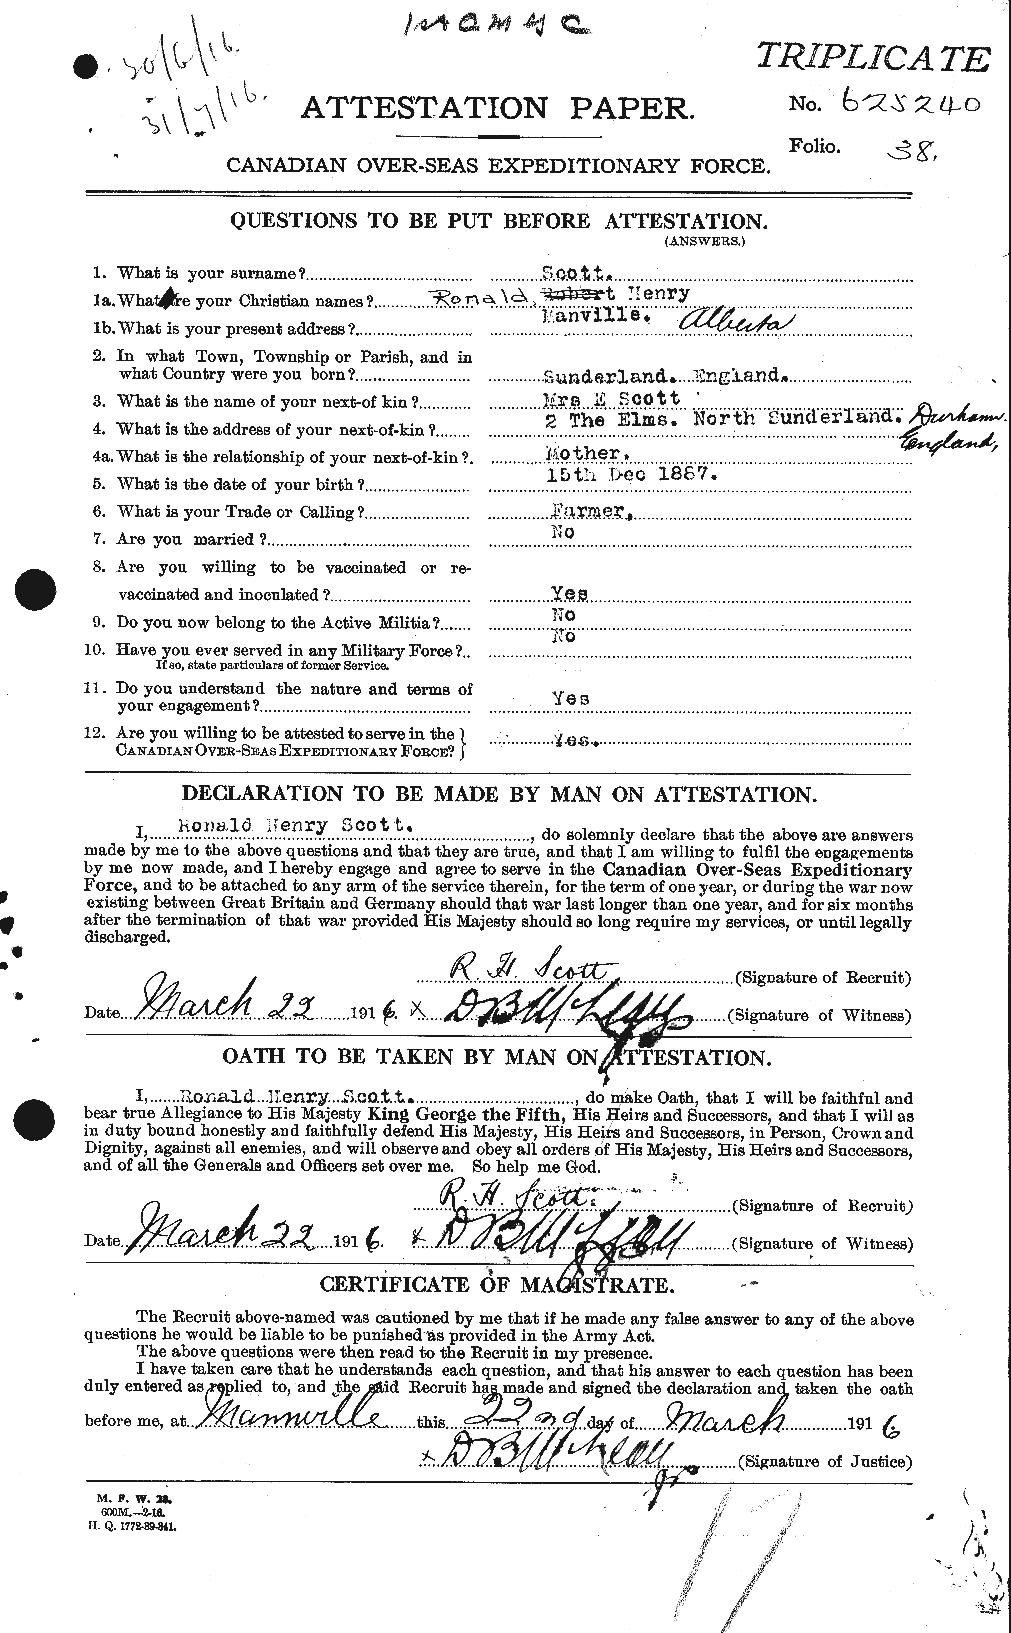 Personnel Records of the First World War - CEF 089109a